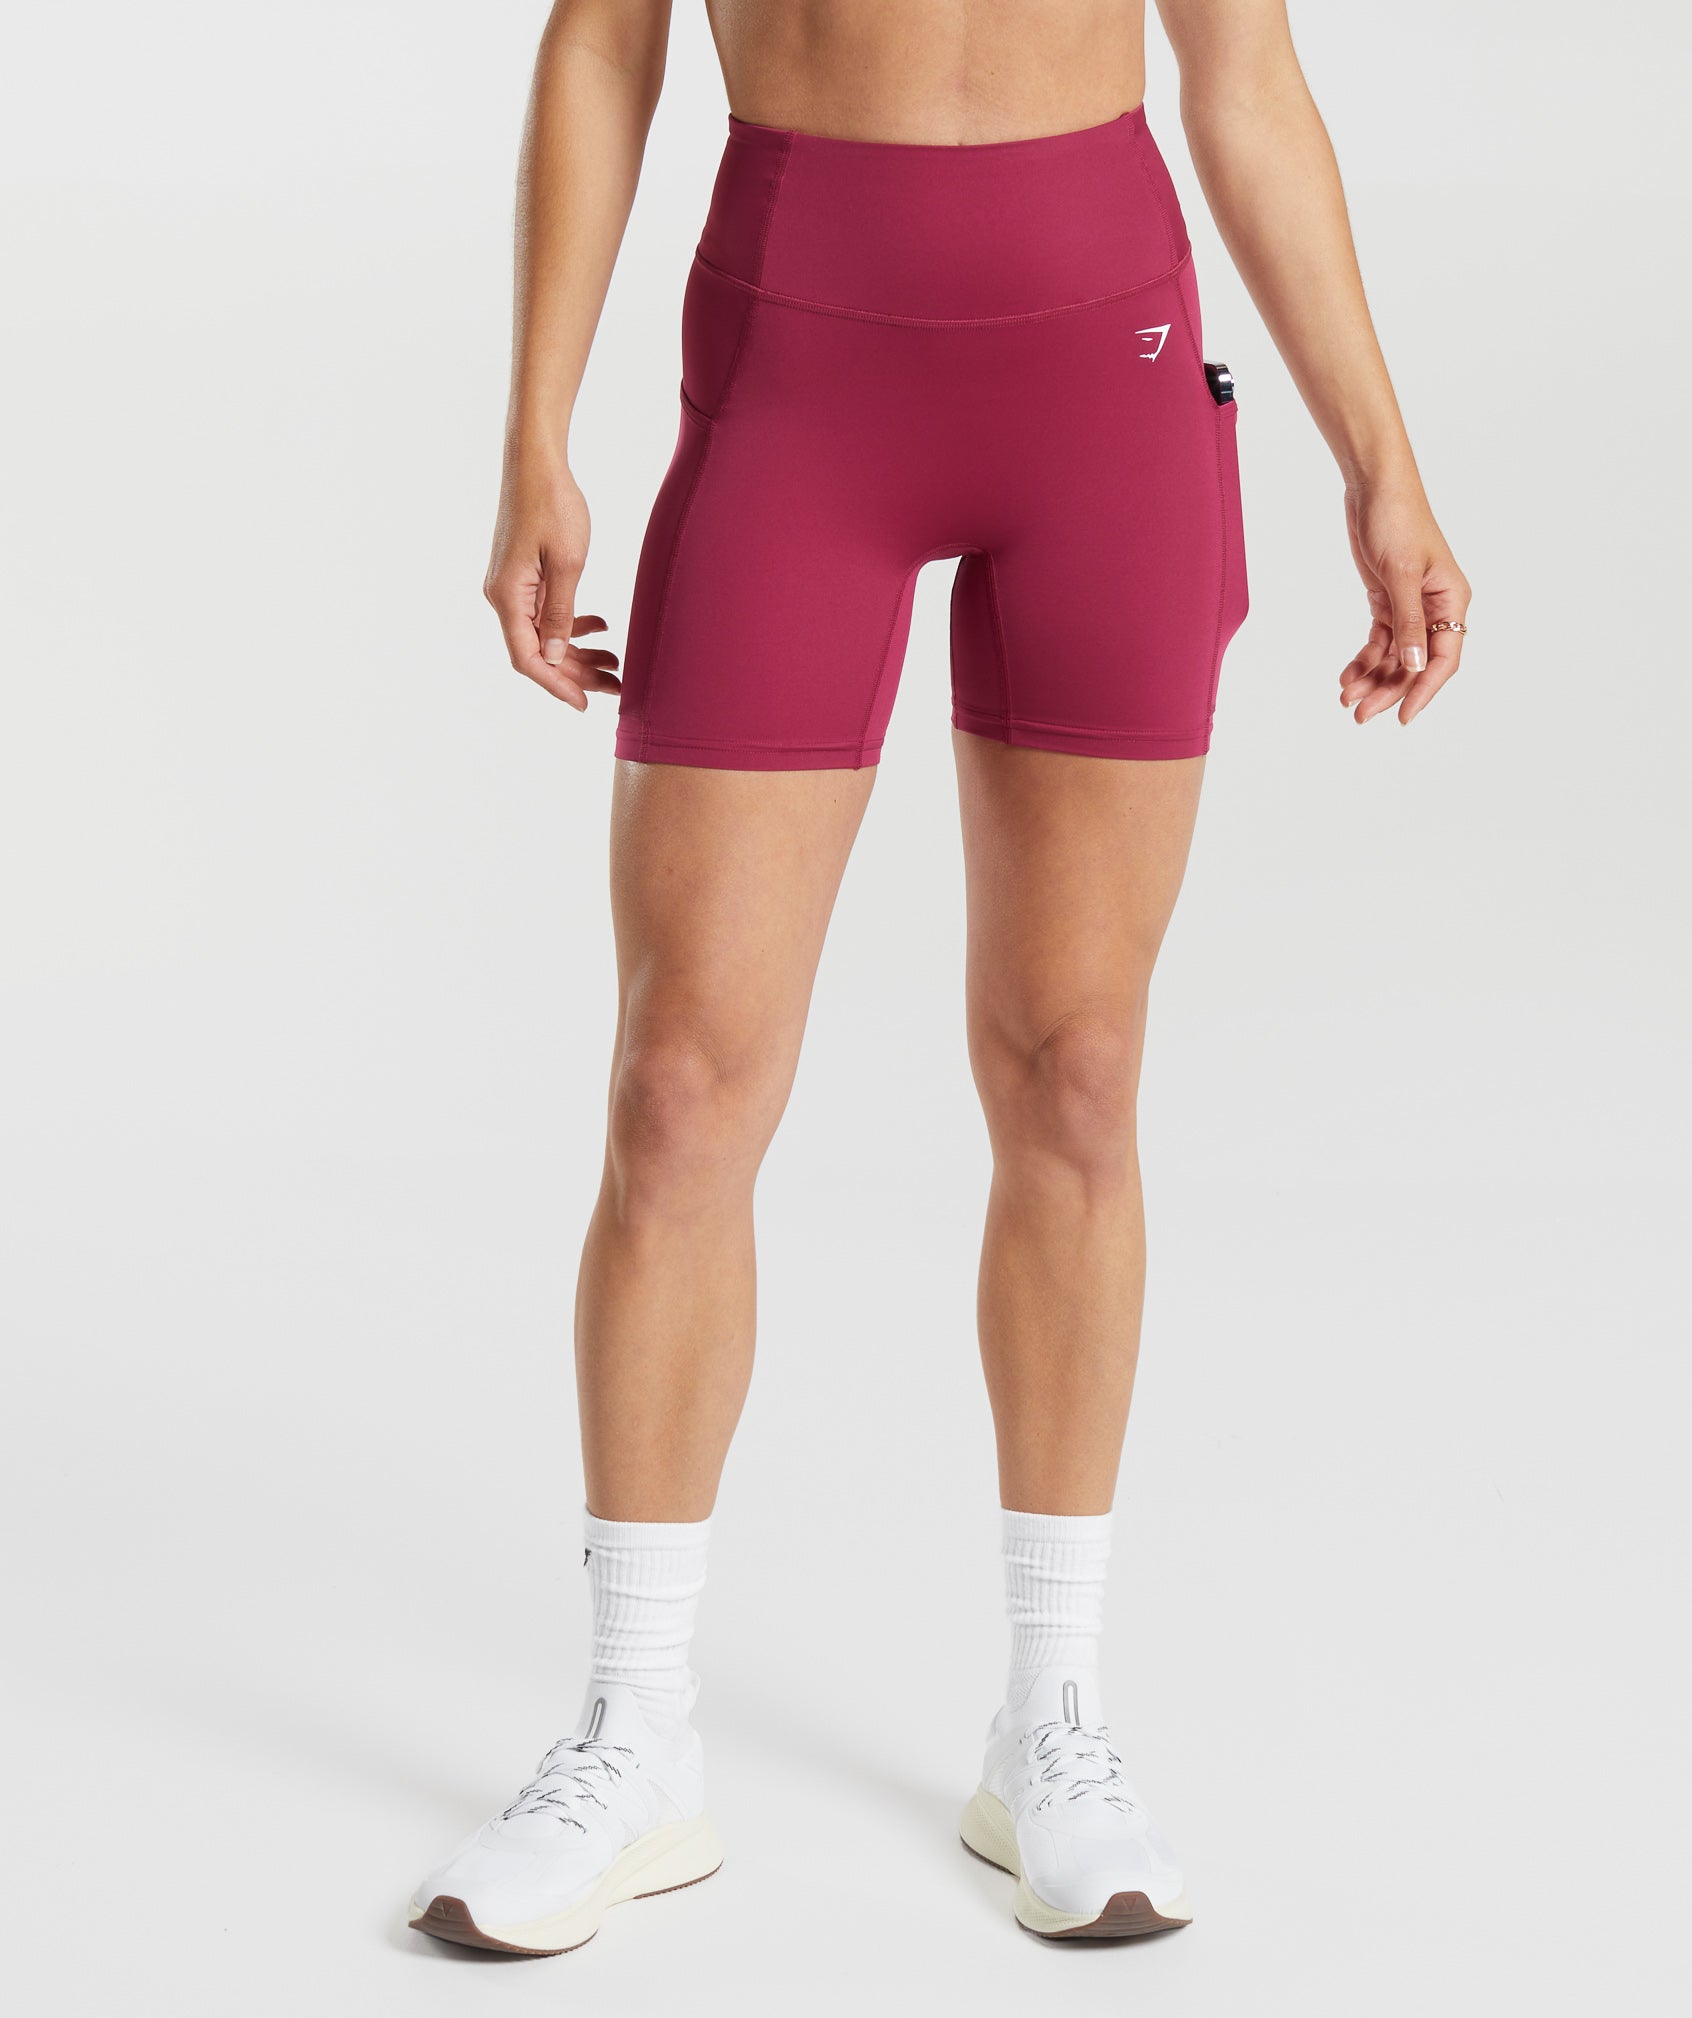 Pocket Shorts in Raspberry Pink - view 2